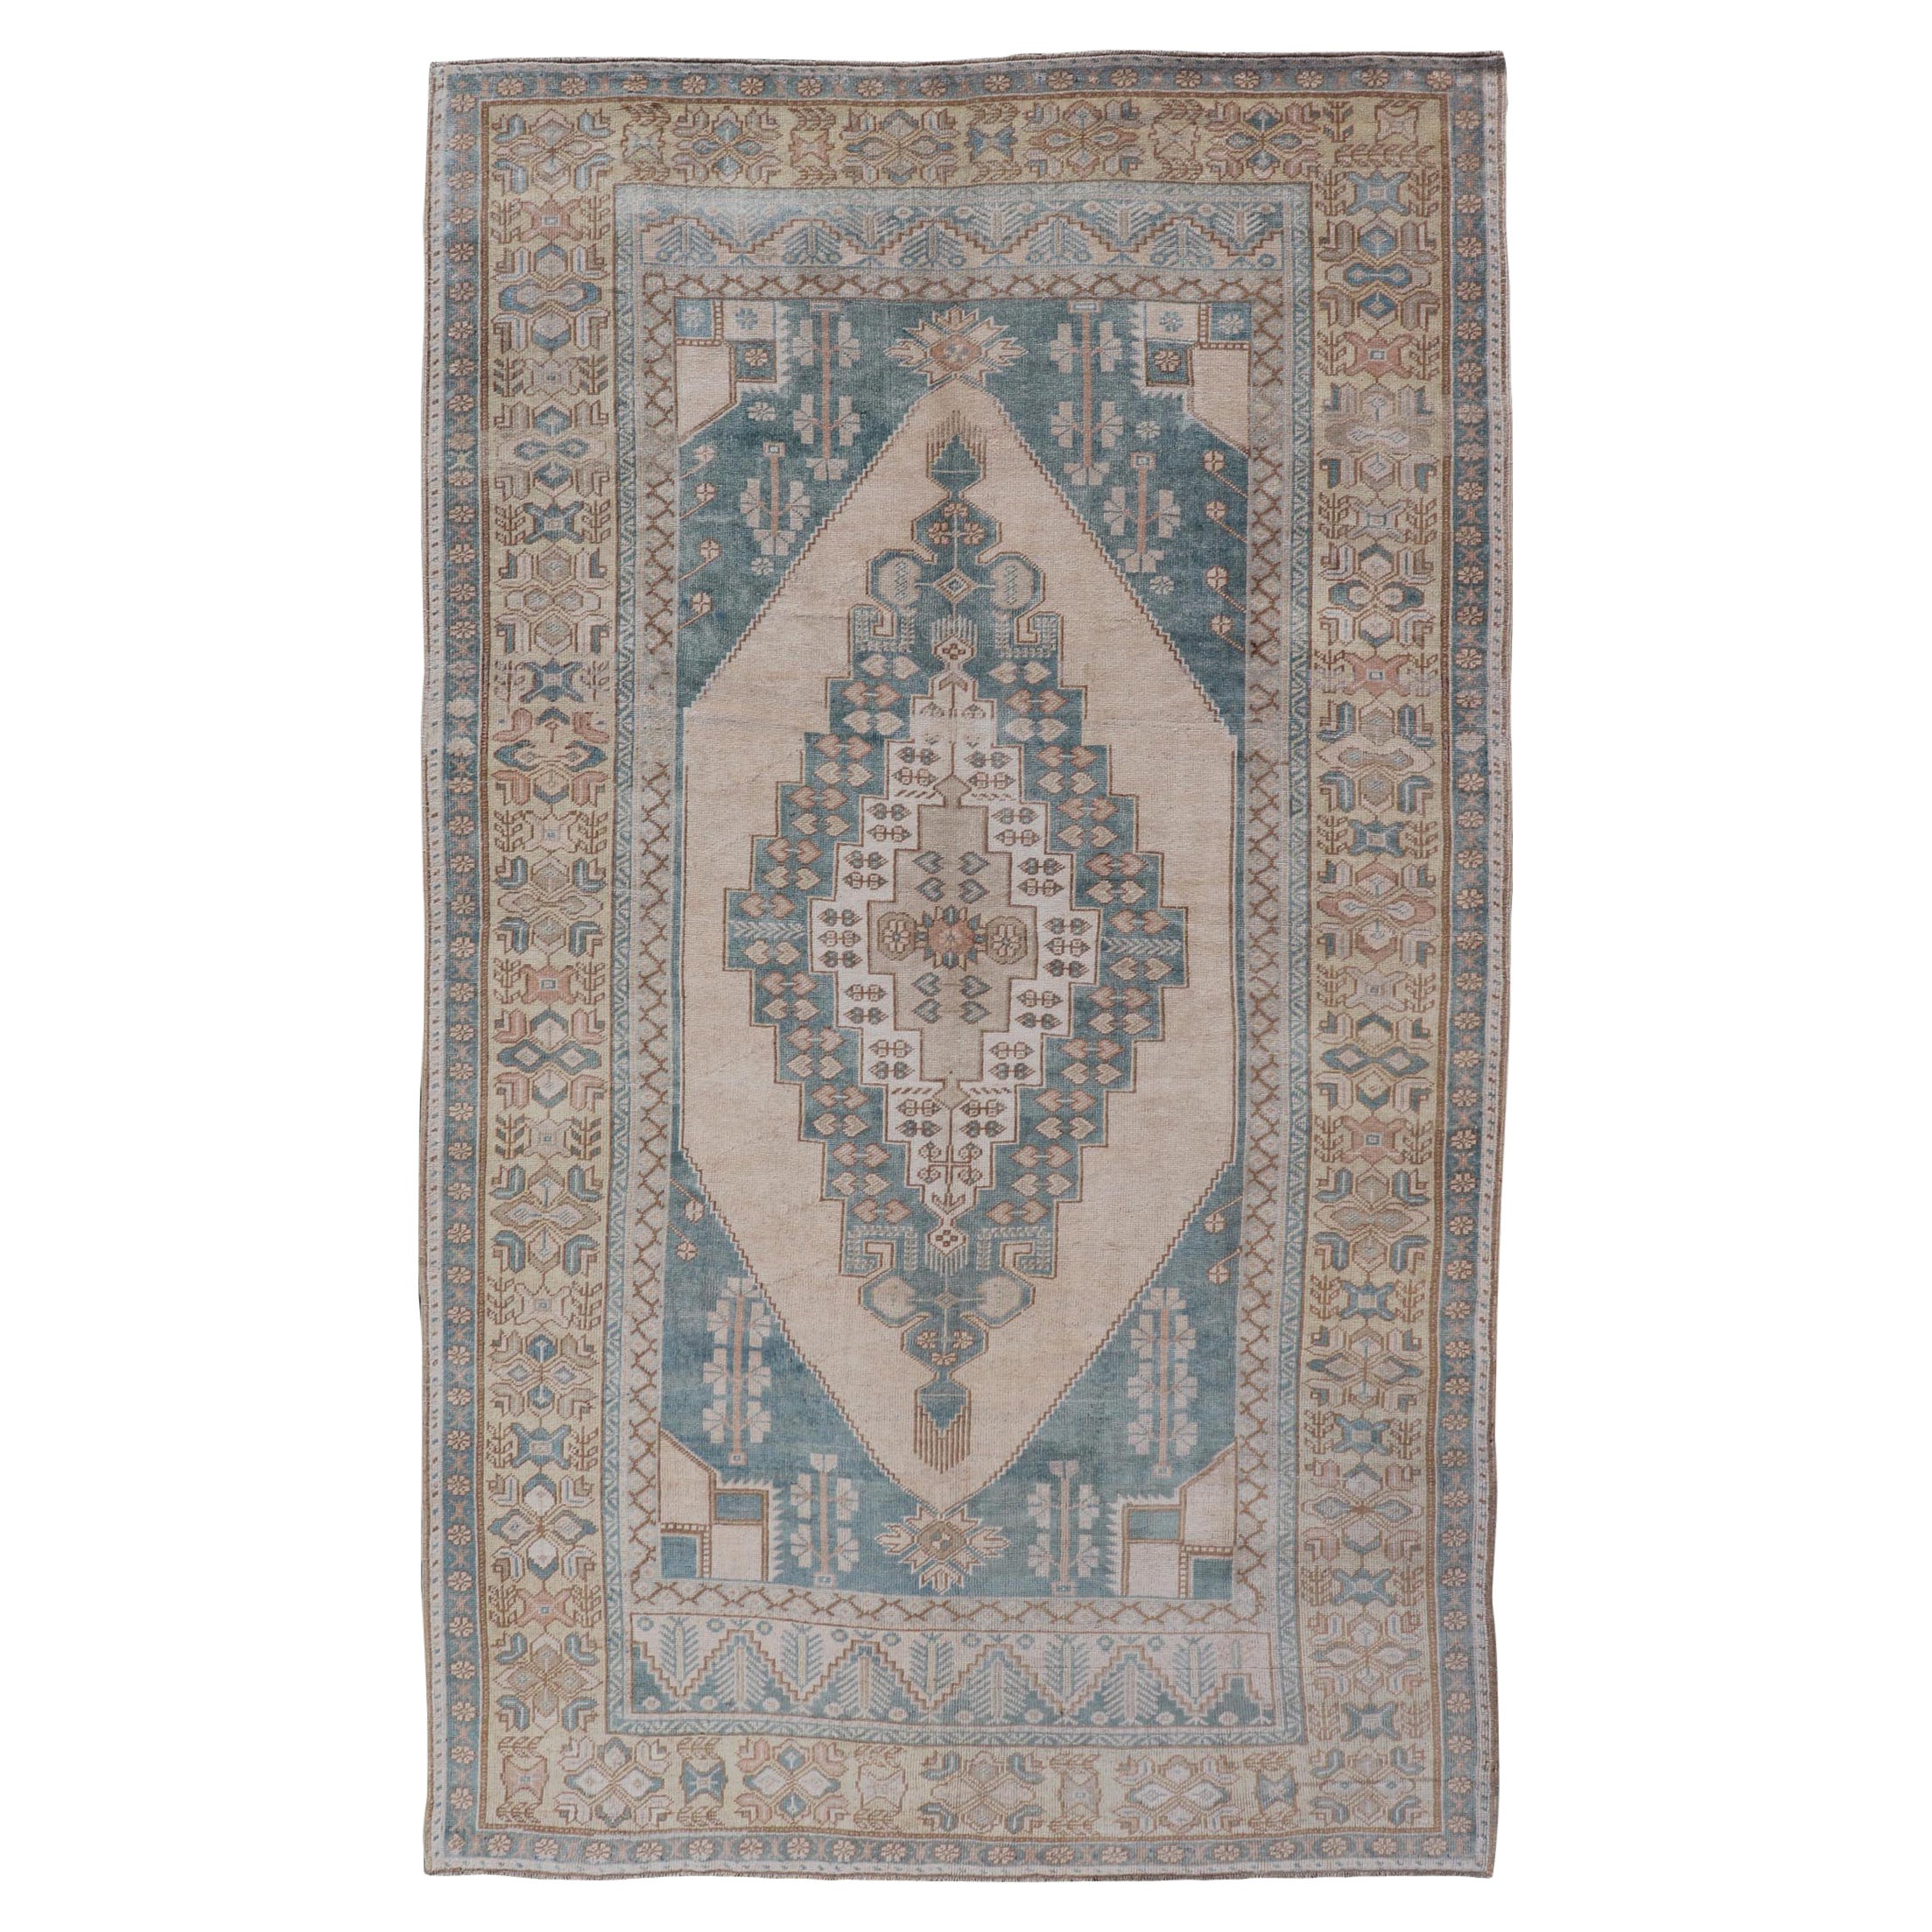 Turkish Oushak Vintage Carpet from Turkey in Light Yellow and Blue Tones